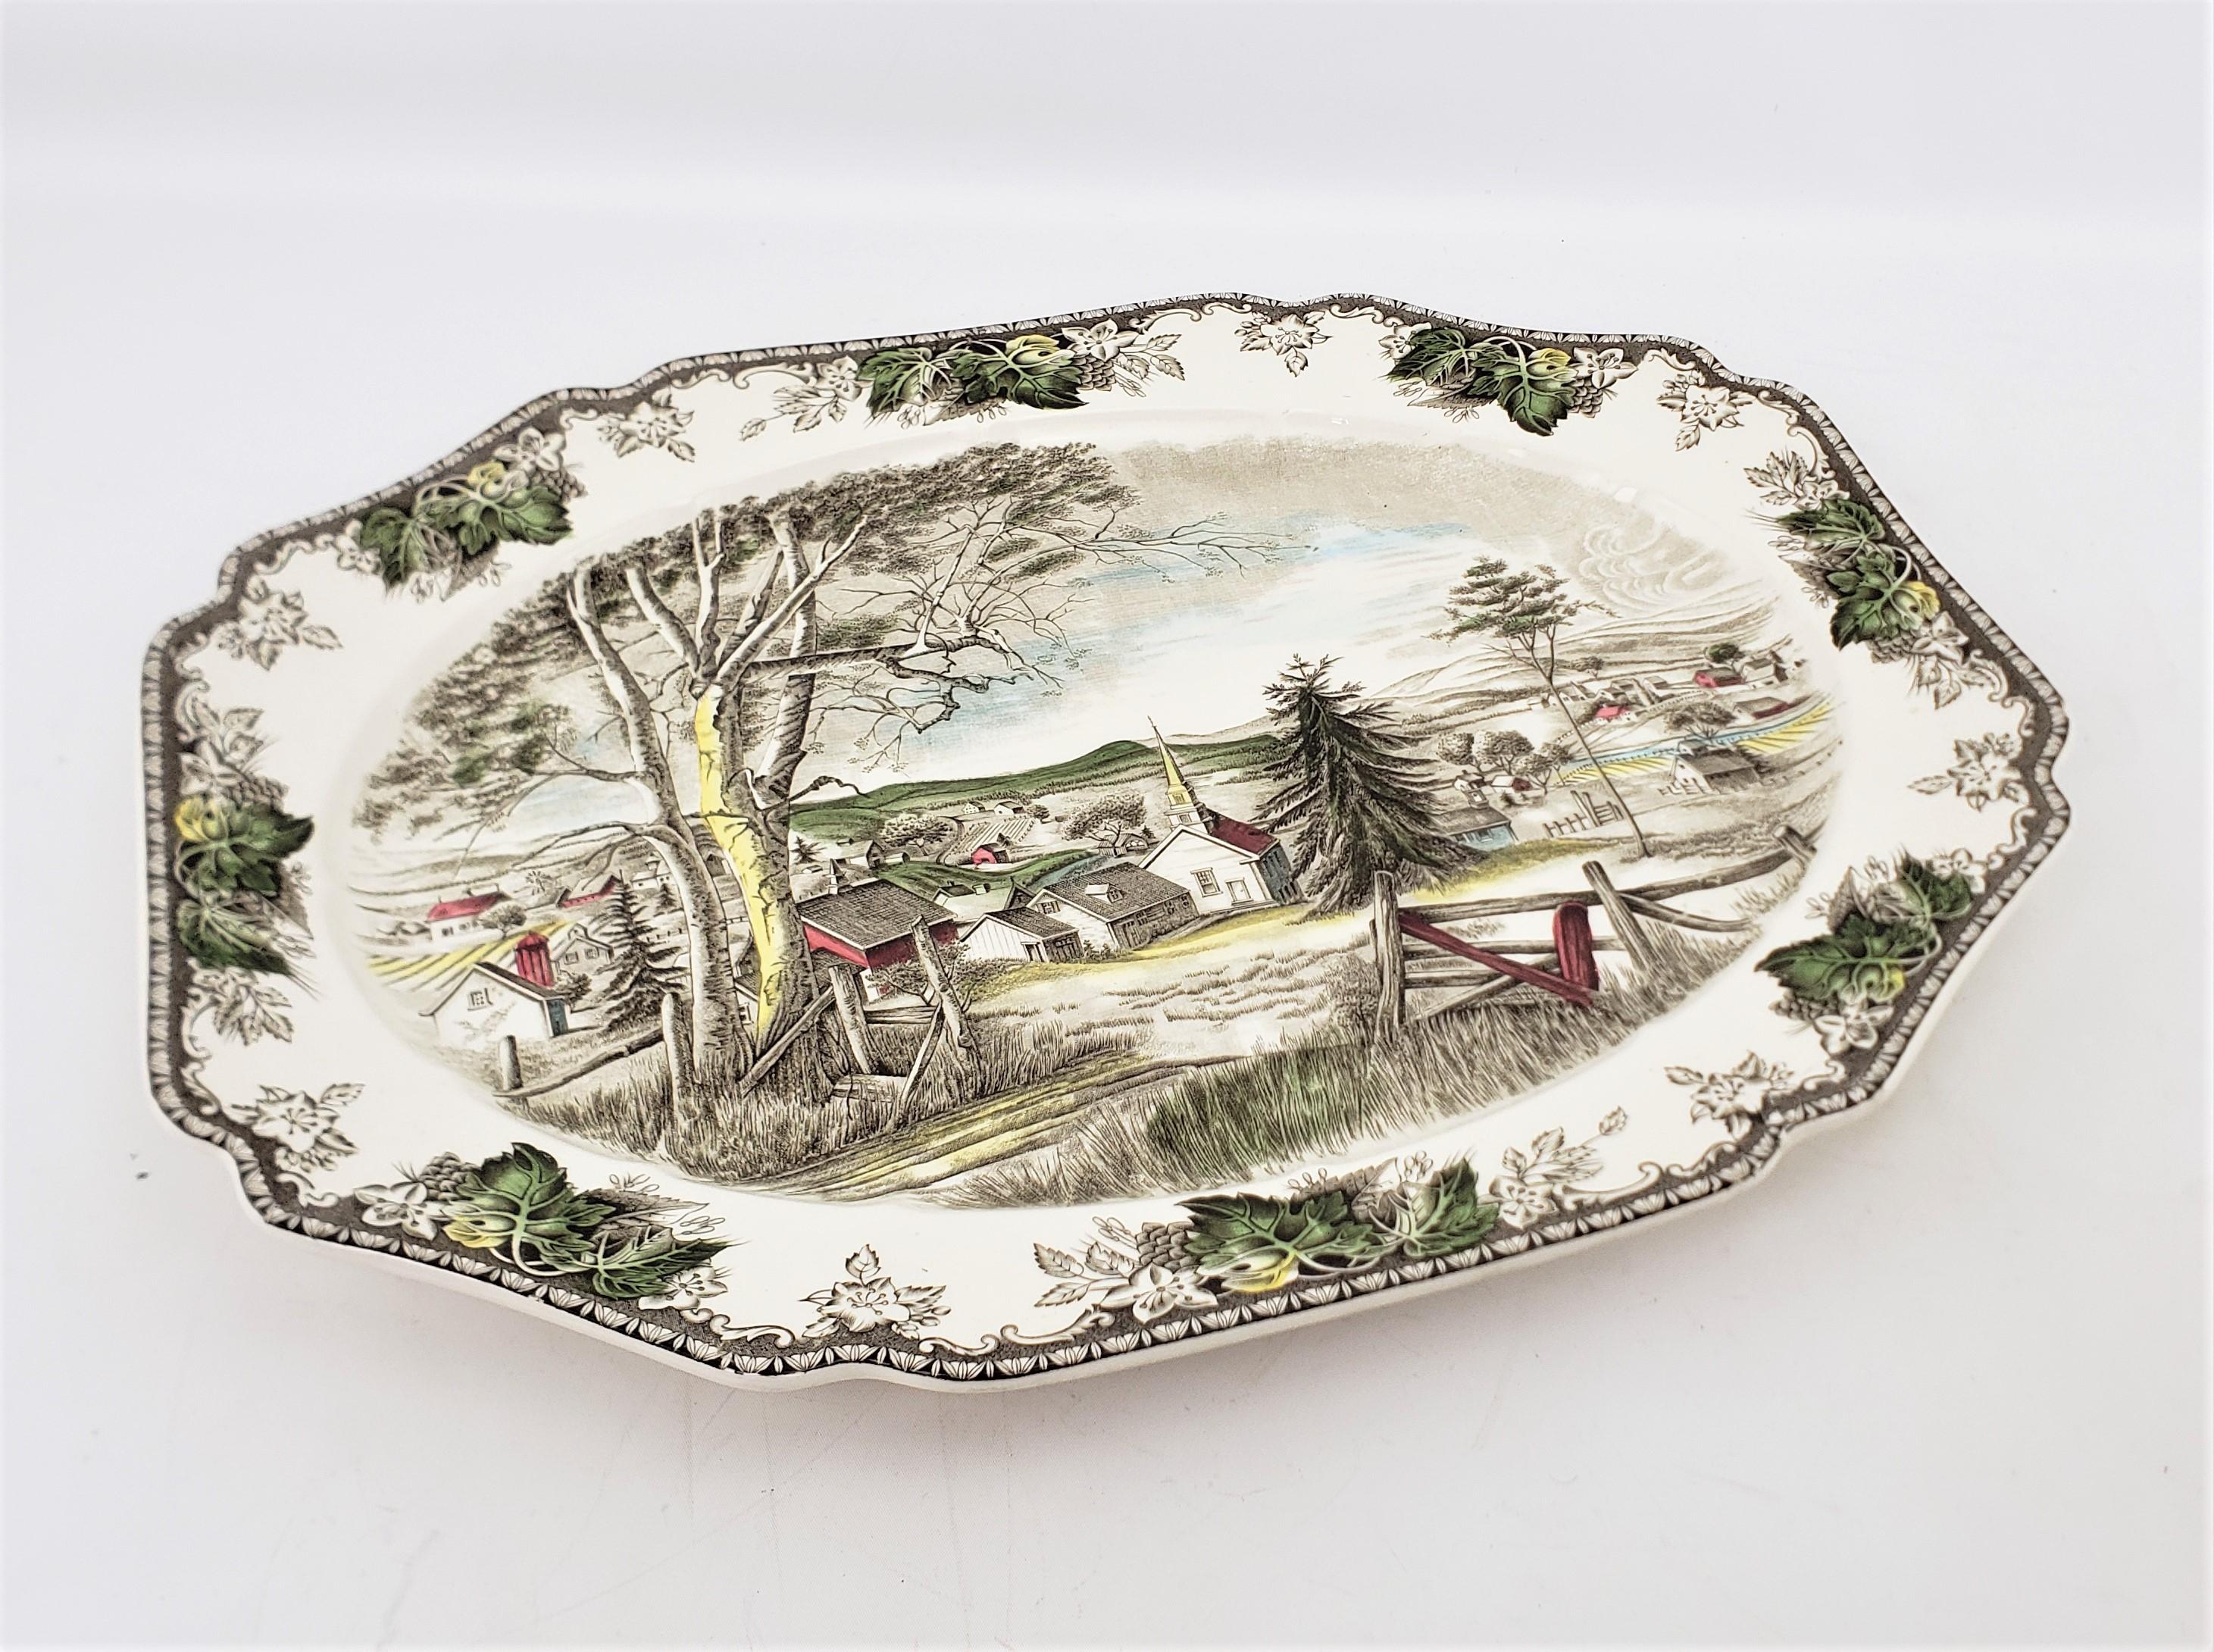 This extremely large serving platter was made by the well known Johnson Brothers of England in approximately 1920 in a Victorian style. The platter is ceramic with a cream ground and decorated with a central hand-engraving of a rural country